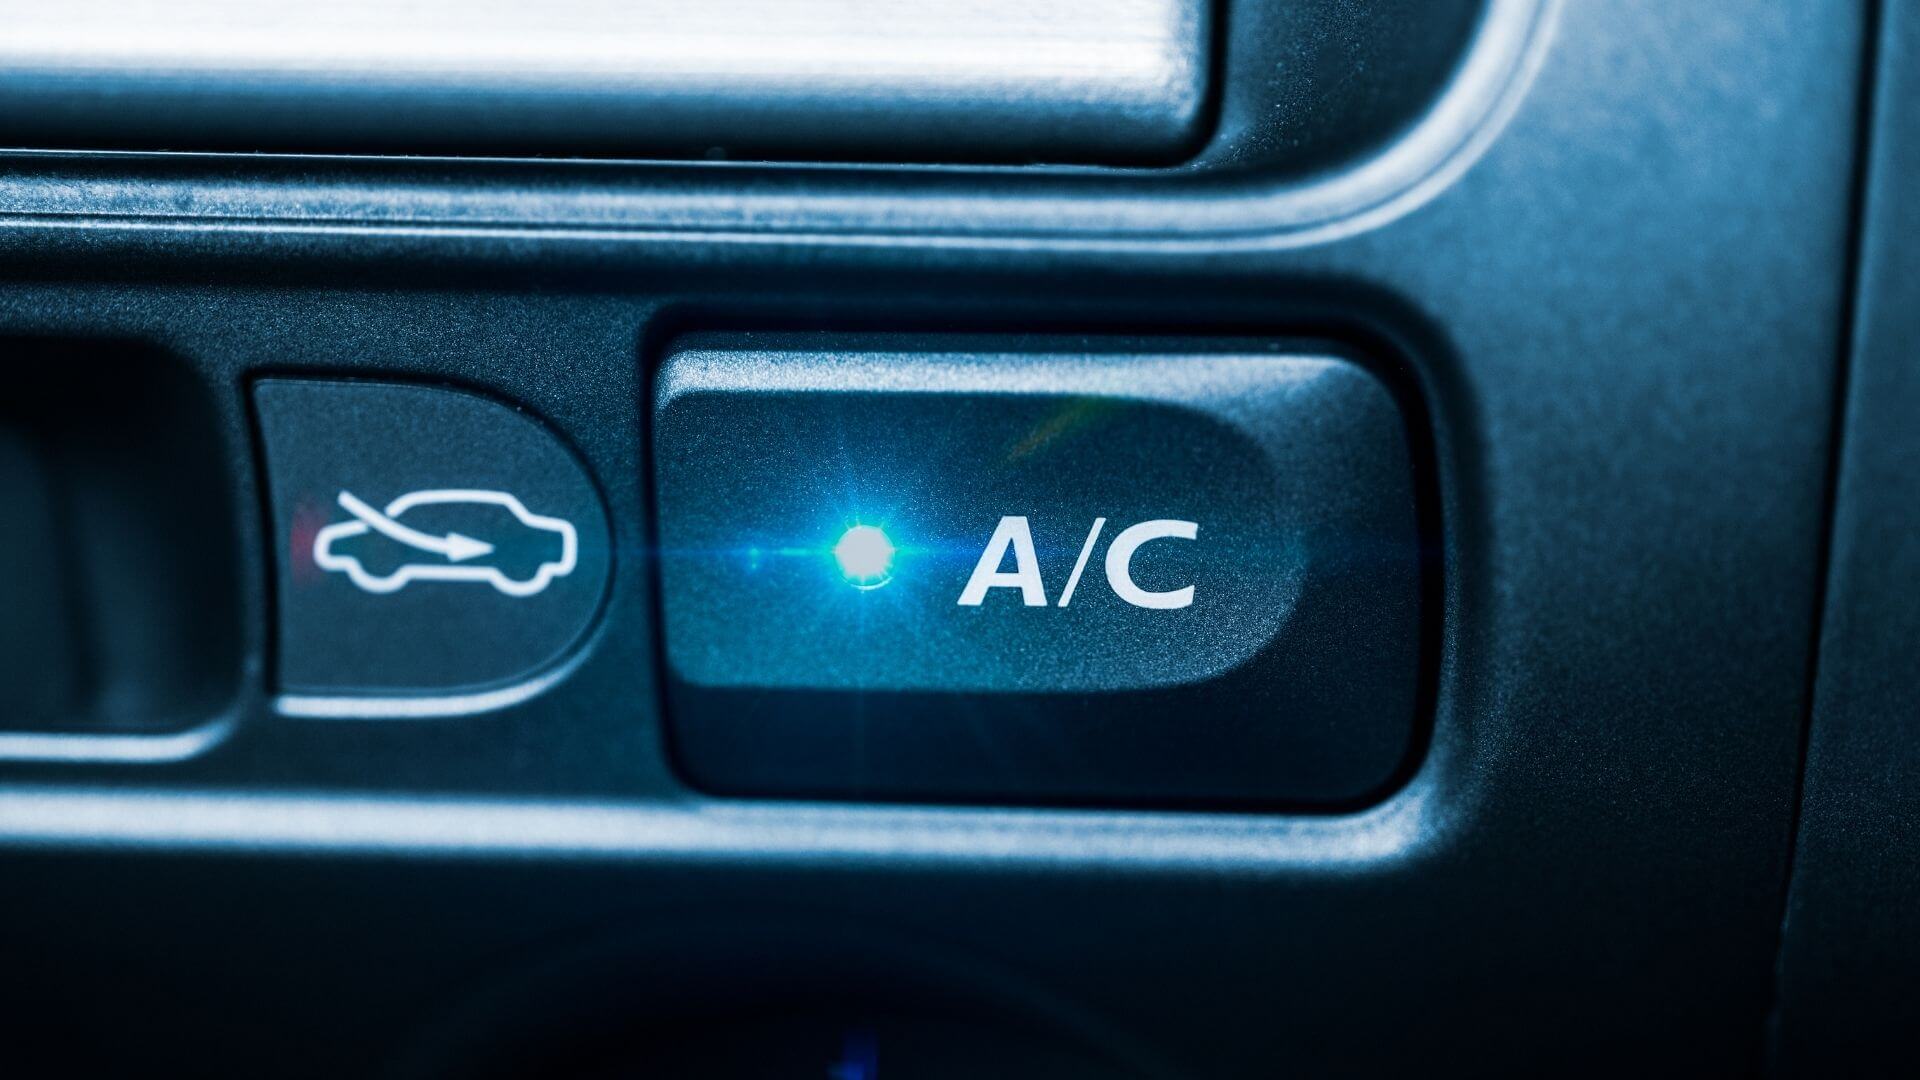 Switch the Car AC off Before Reaching a Destination